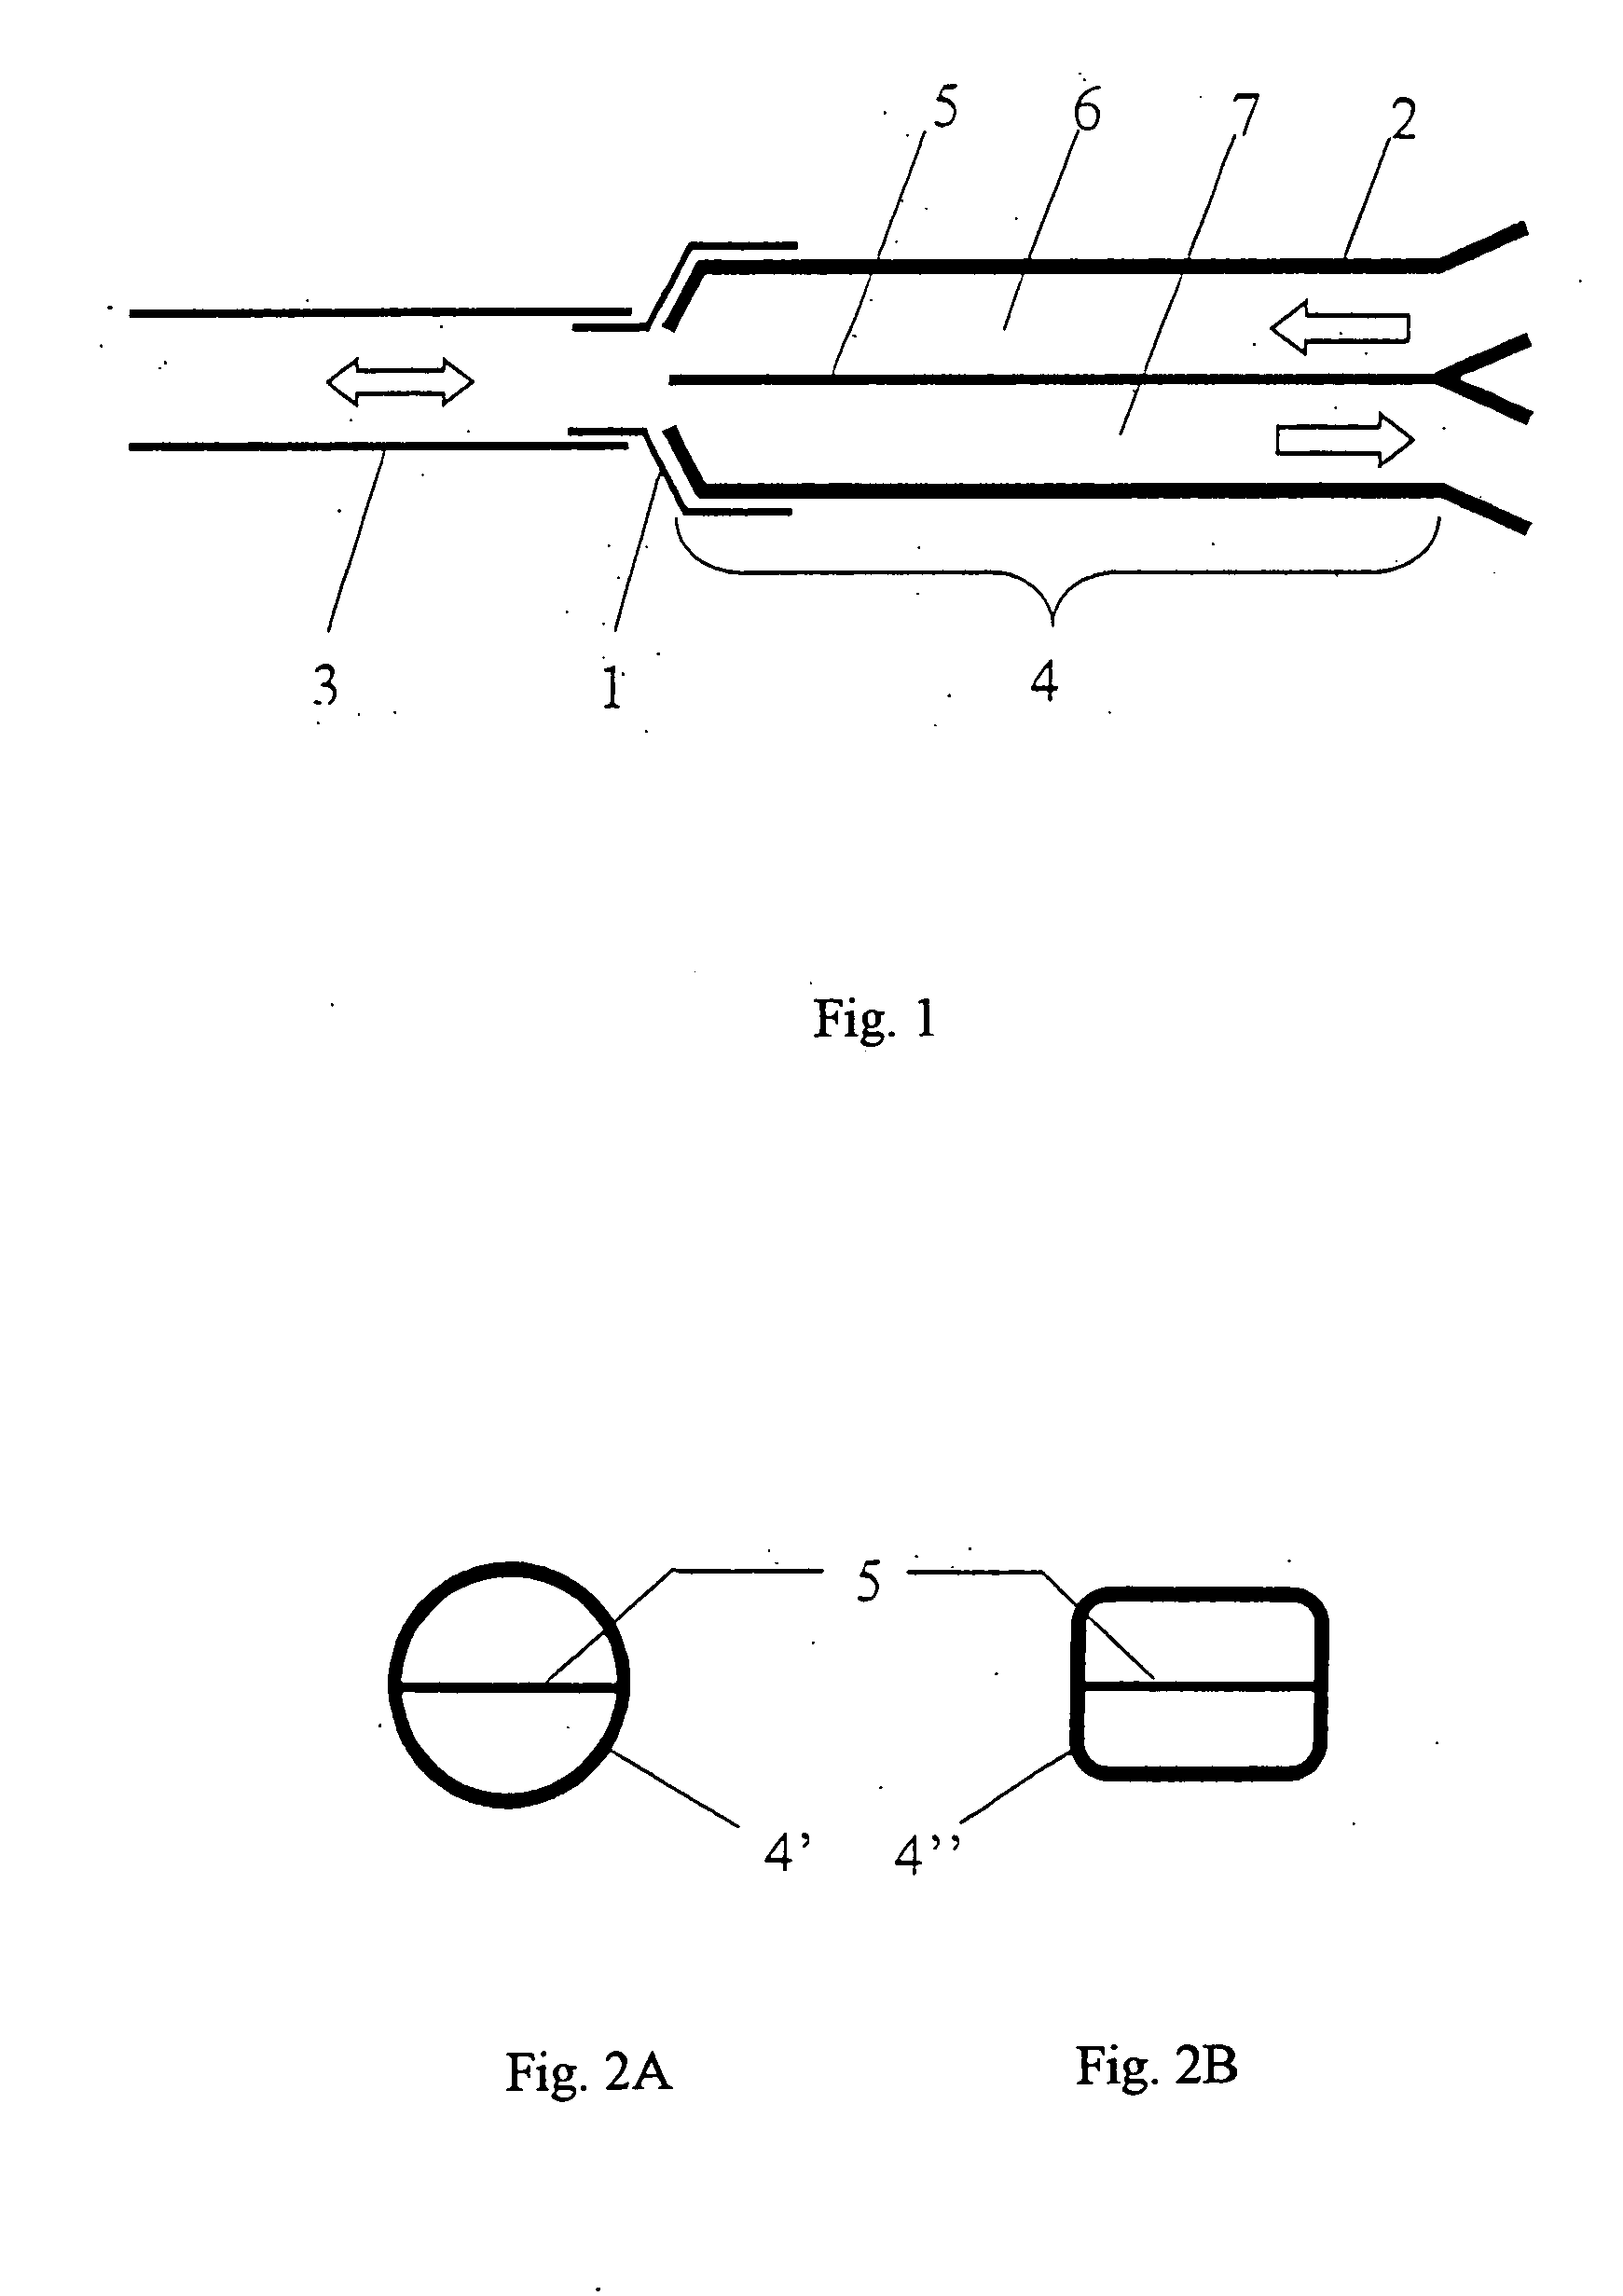 Measuring device for measuring the volume flow or the substance properties of a gas, whose direction of flow can reverse